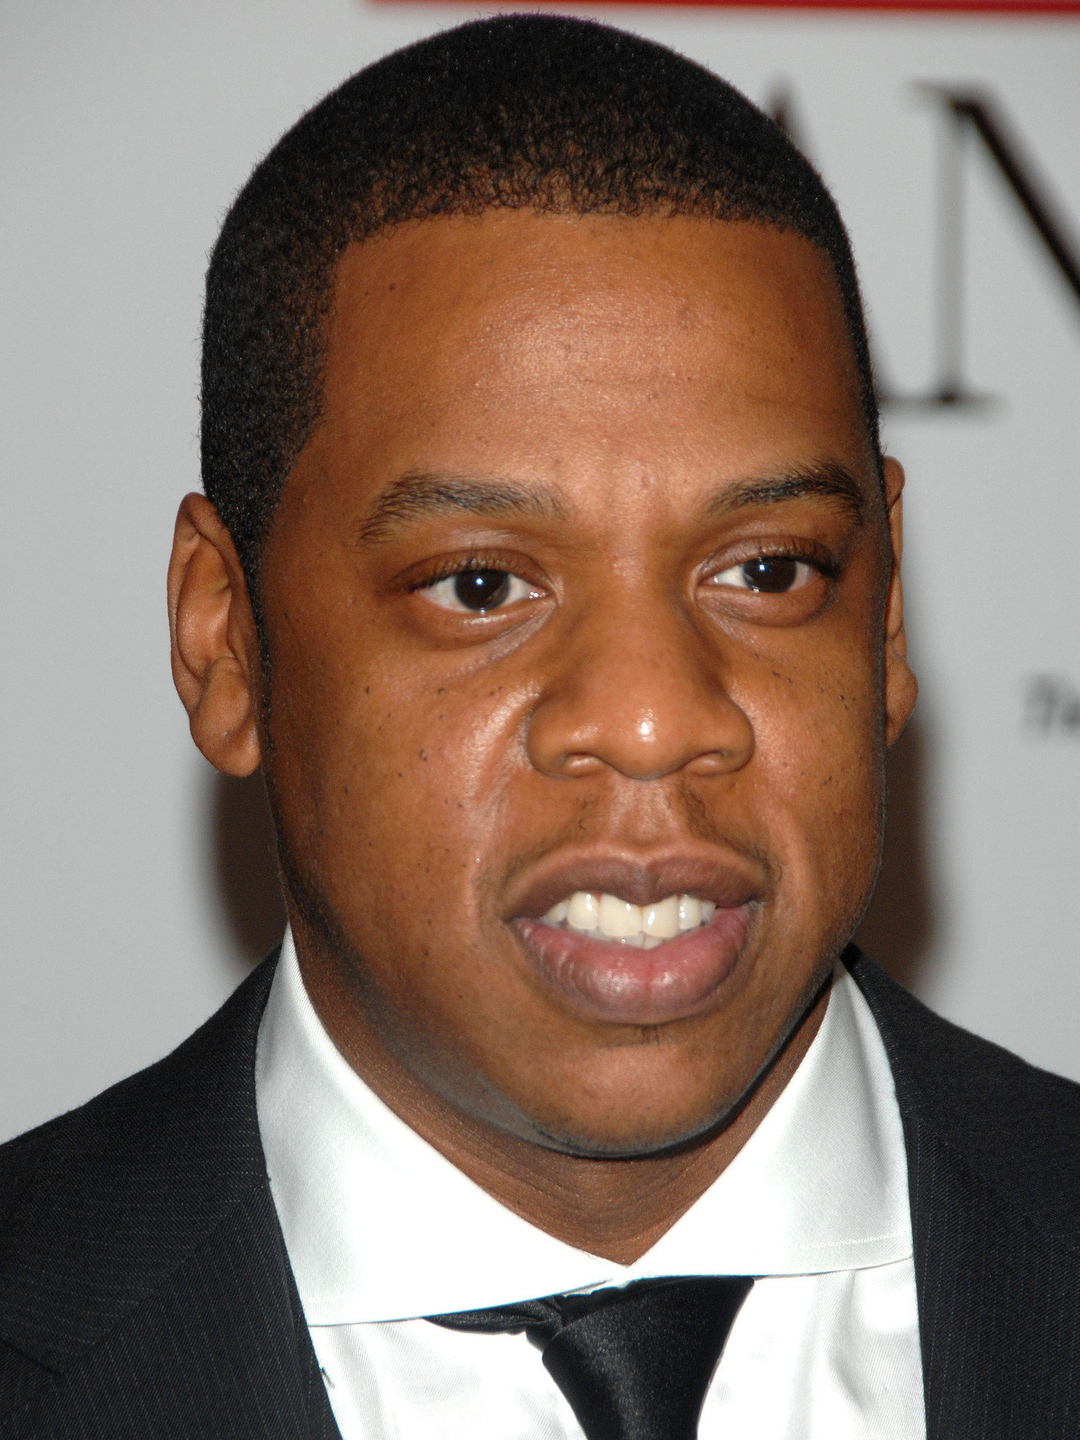 Jay-Z who is his mother